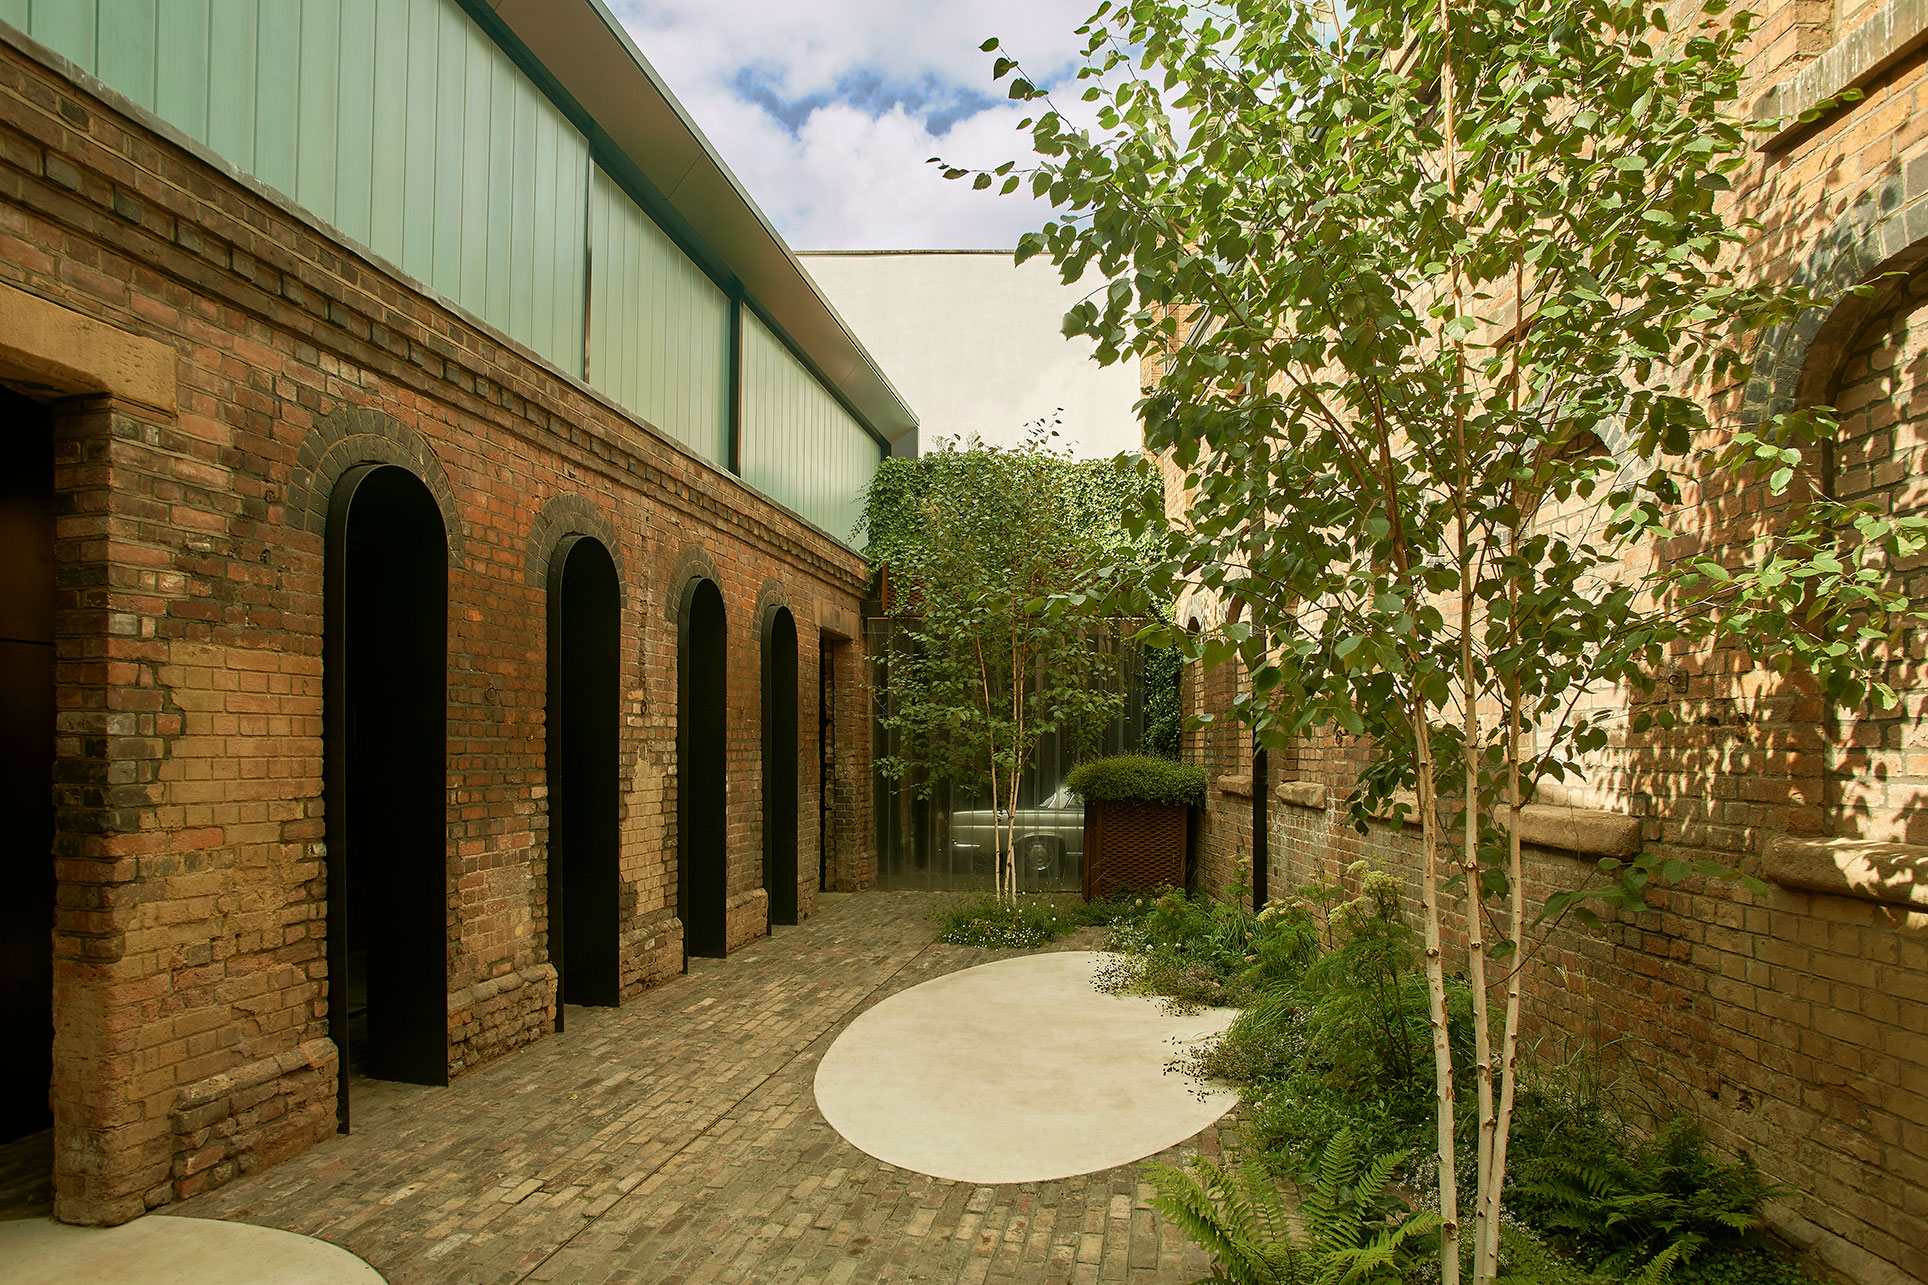 Original brickwork openings have been lined in rolled steel to provide an arcaded podium onto the main cobbled courtyard.  This contrasts with lightness of the cast glass and steel monolith of the first floor.